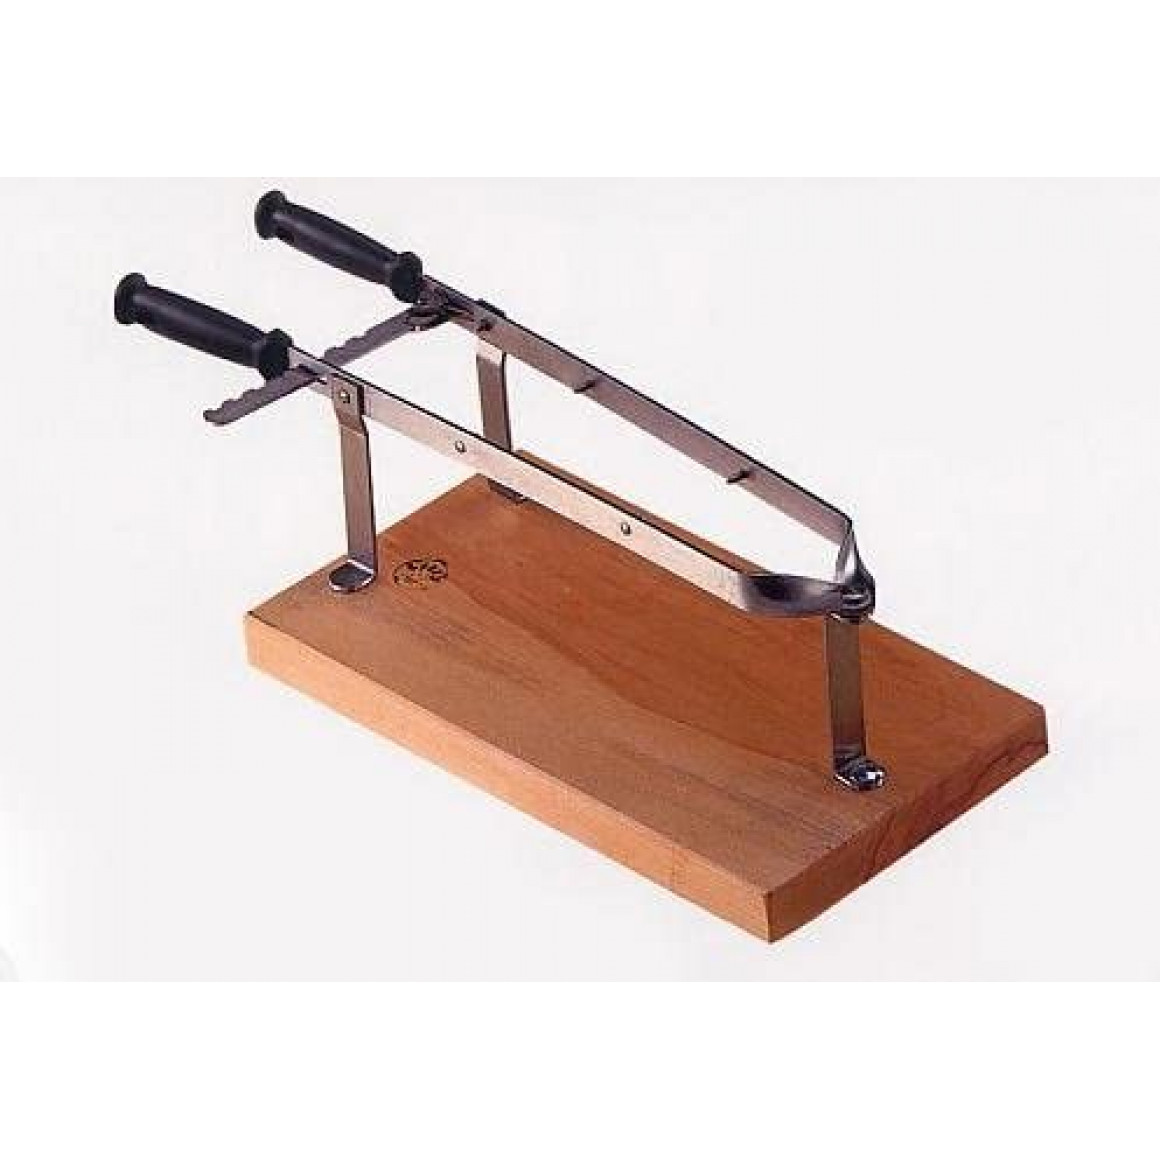 Stainless steel Ham holding vice with wooden base